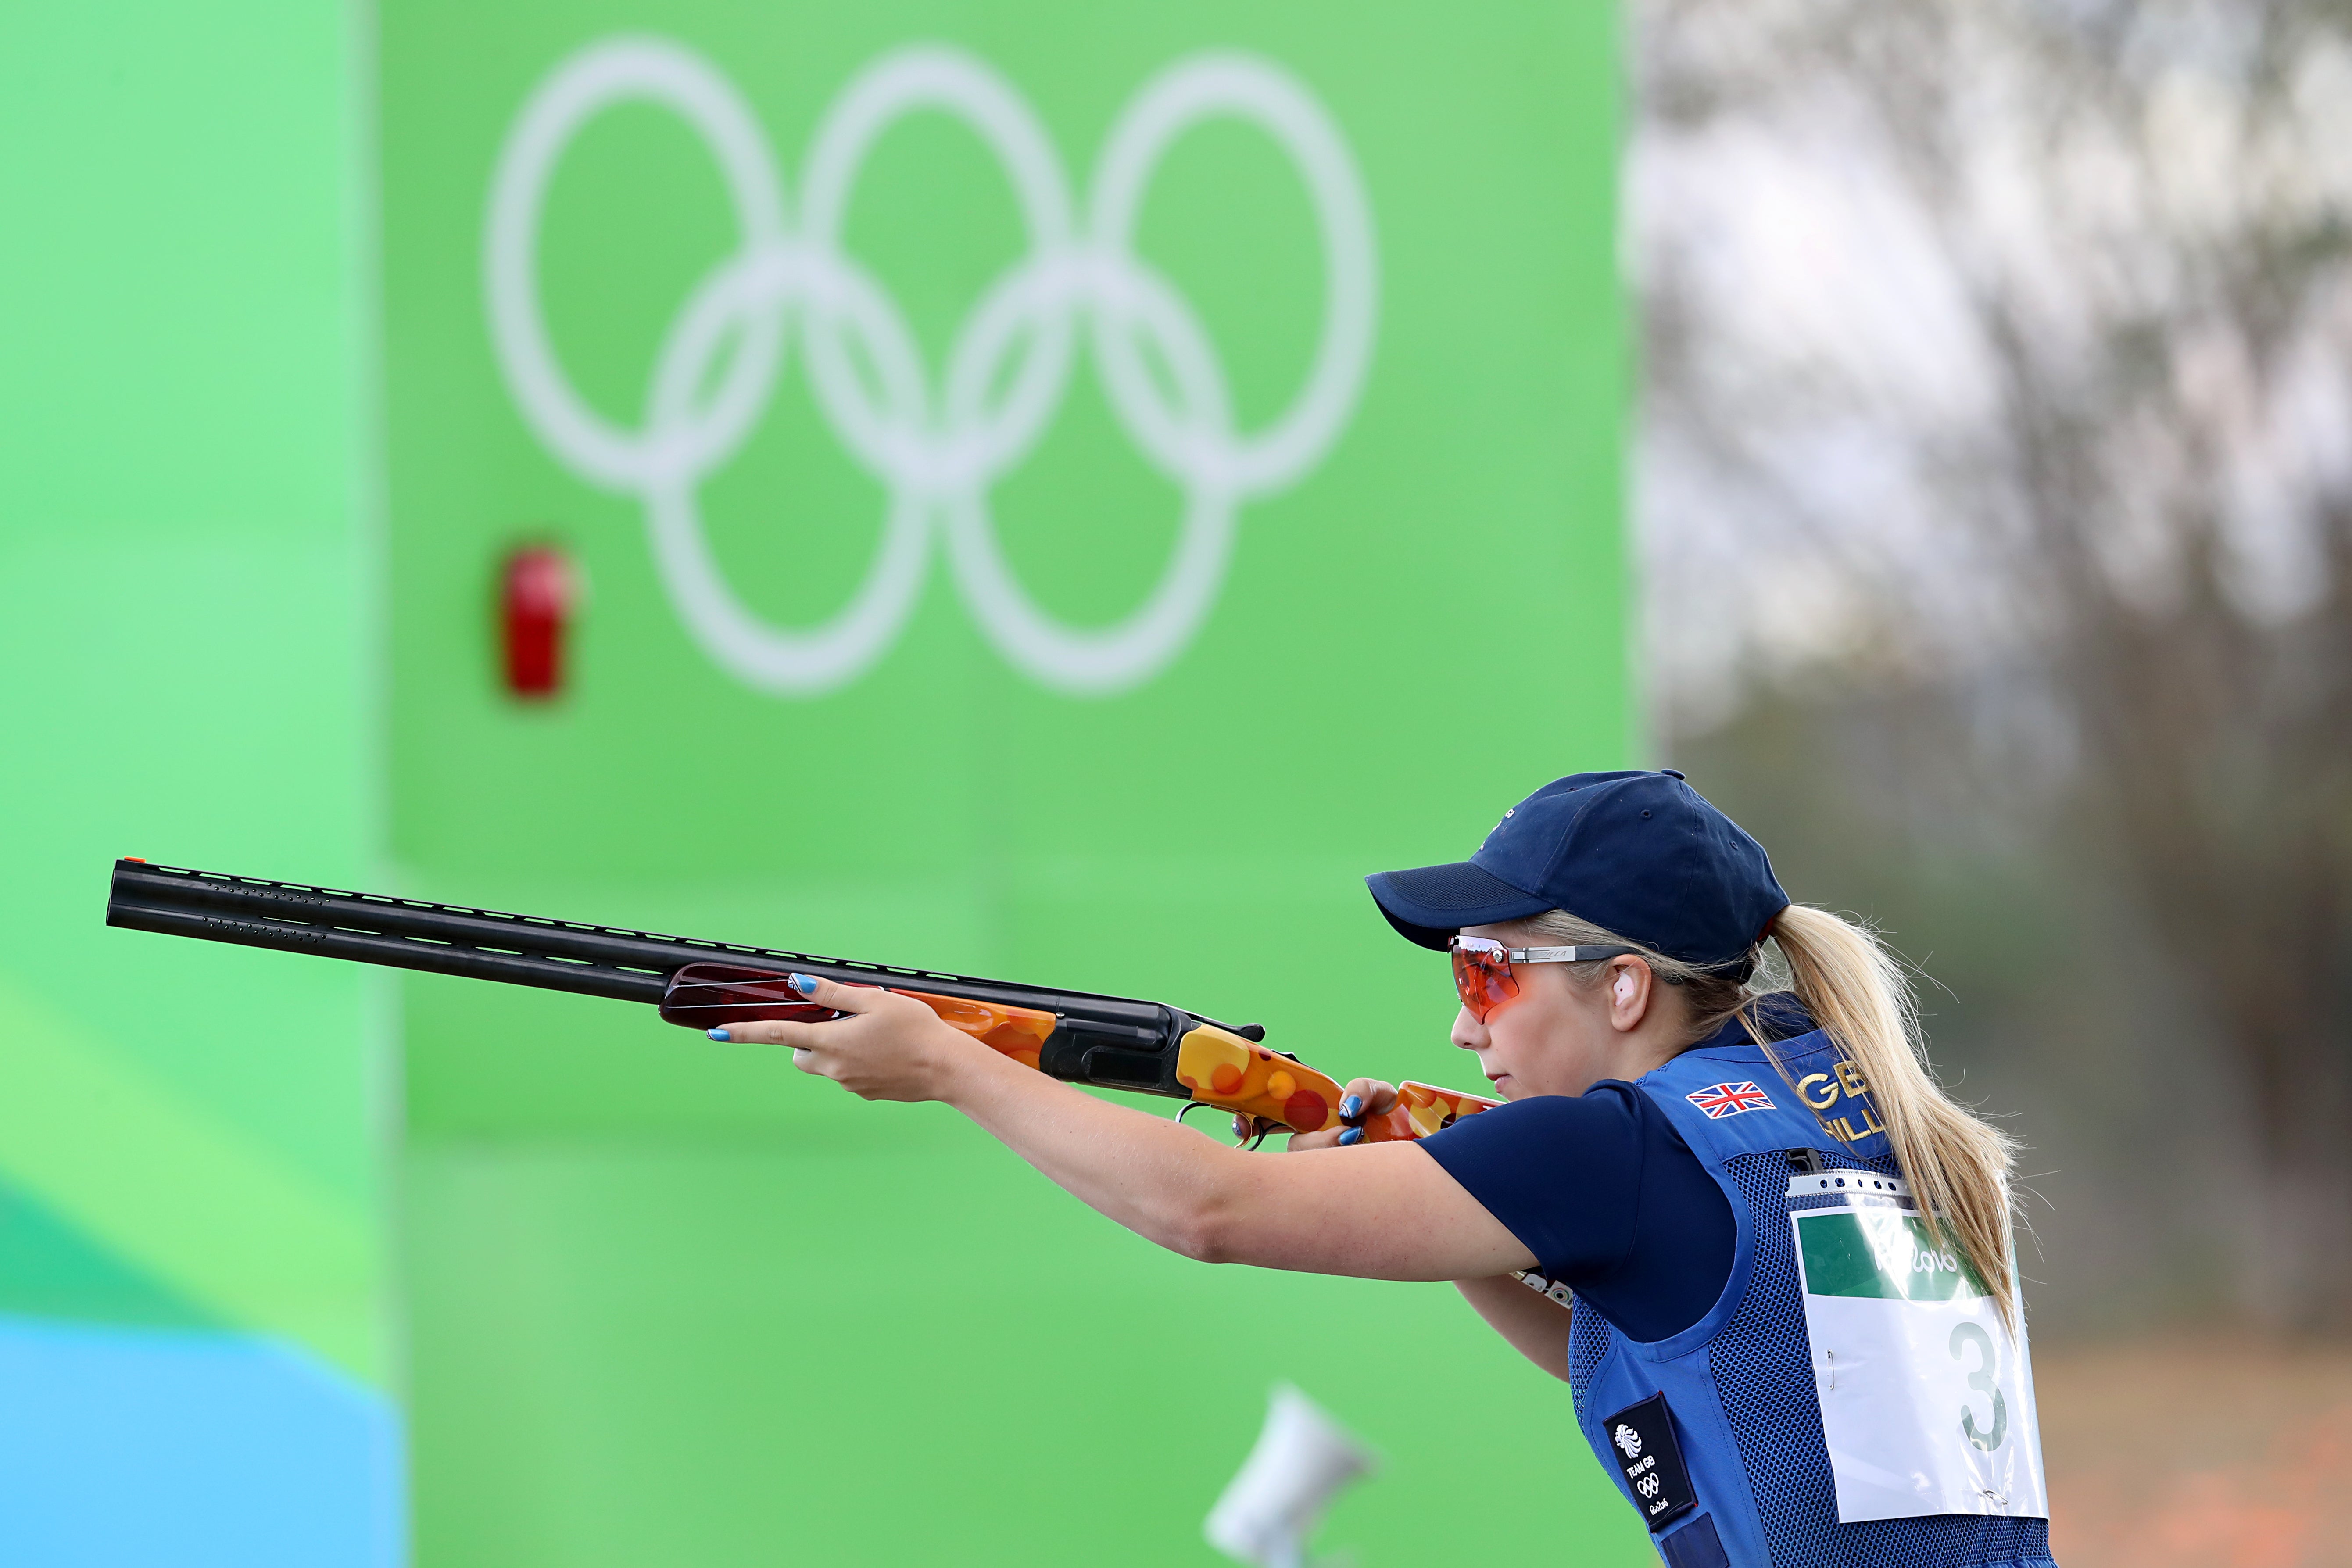 Rutter made her Olympic debut in Rio in 2016